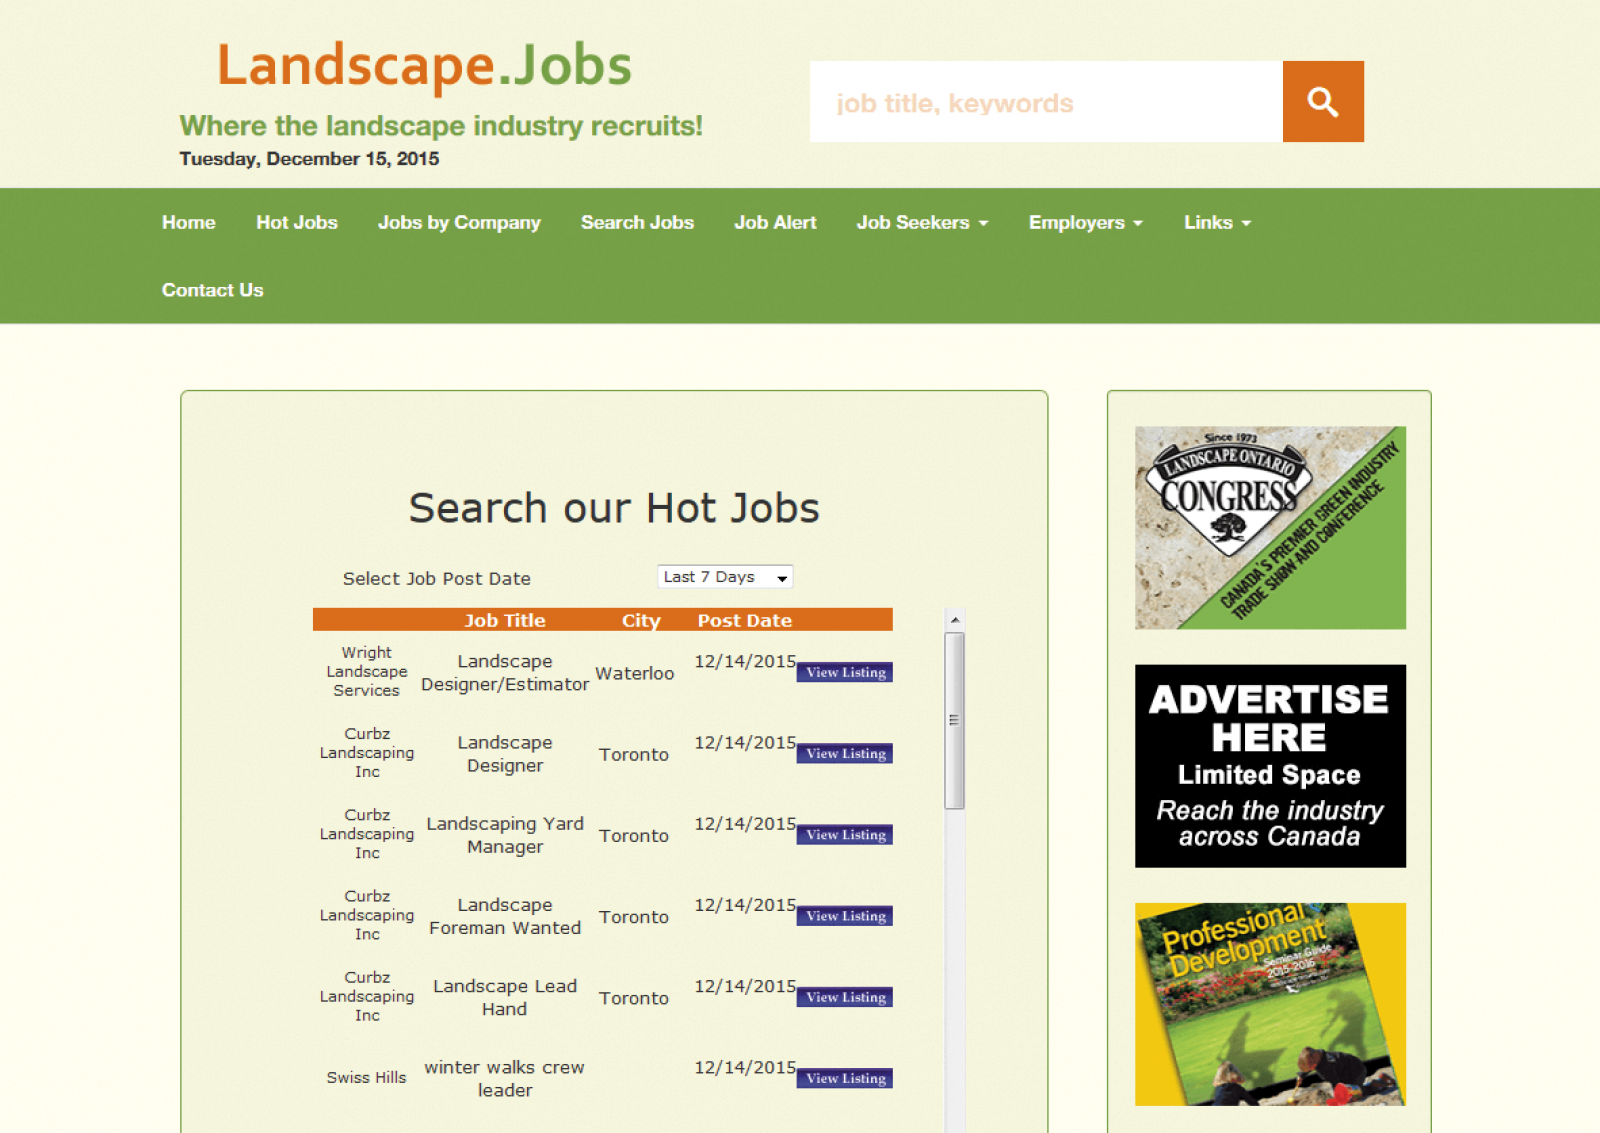 Free jobs resource for landscape industry